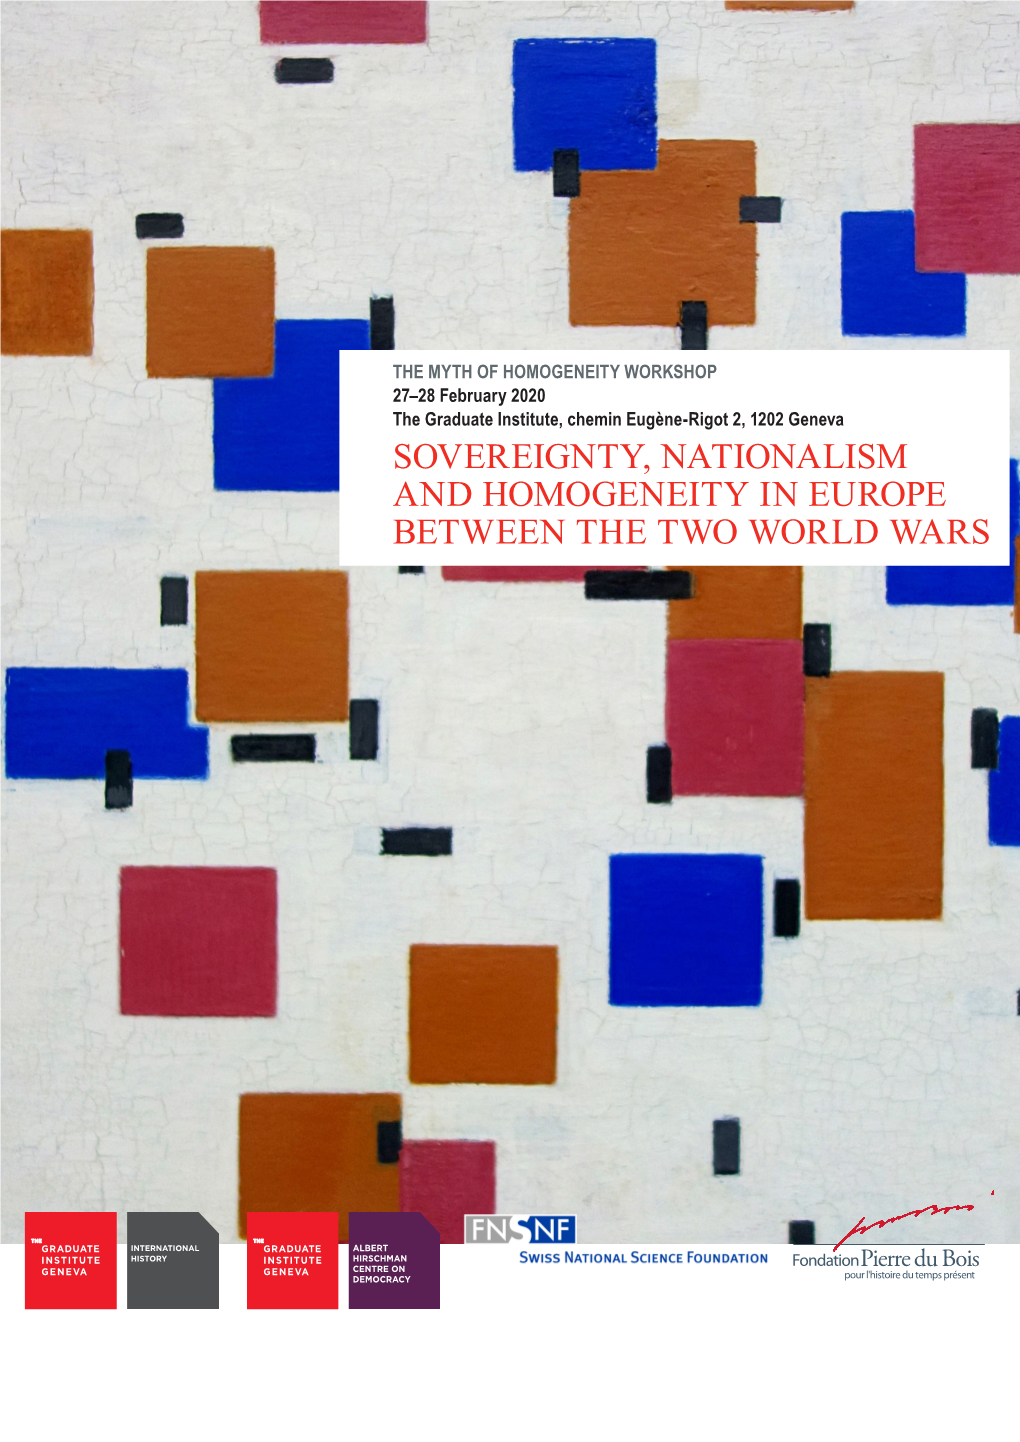 Sovereignty, Nationalism and Homogeneity in Europe Between the Two World Wars